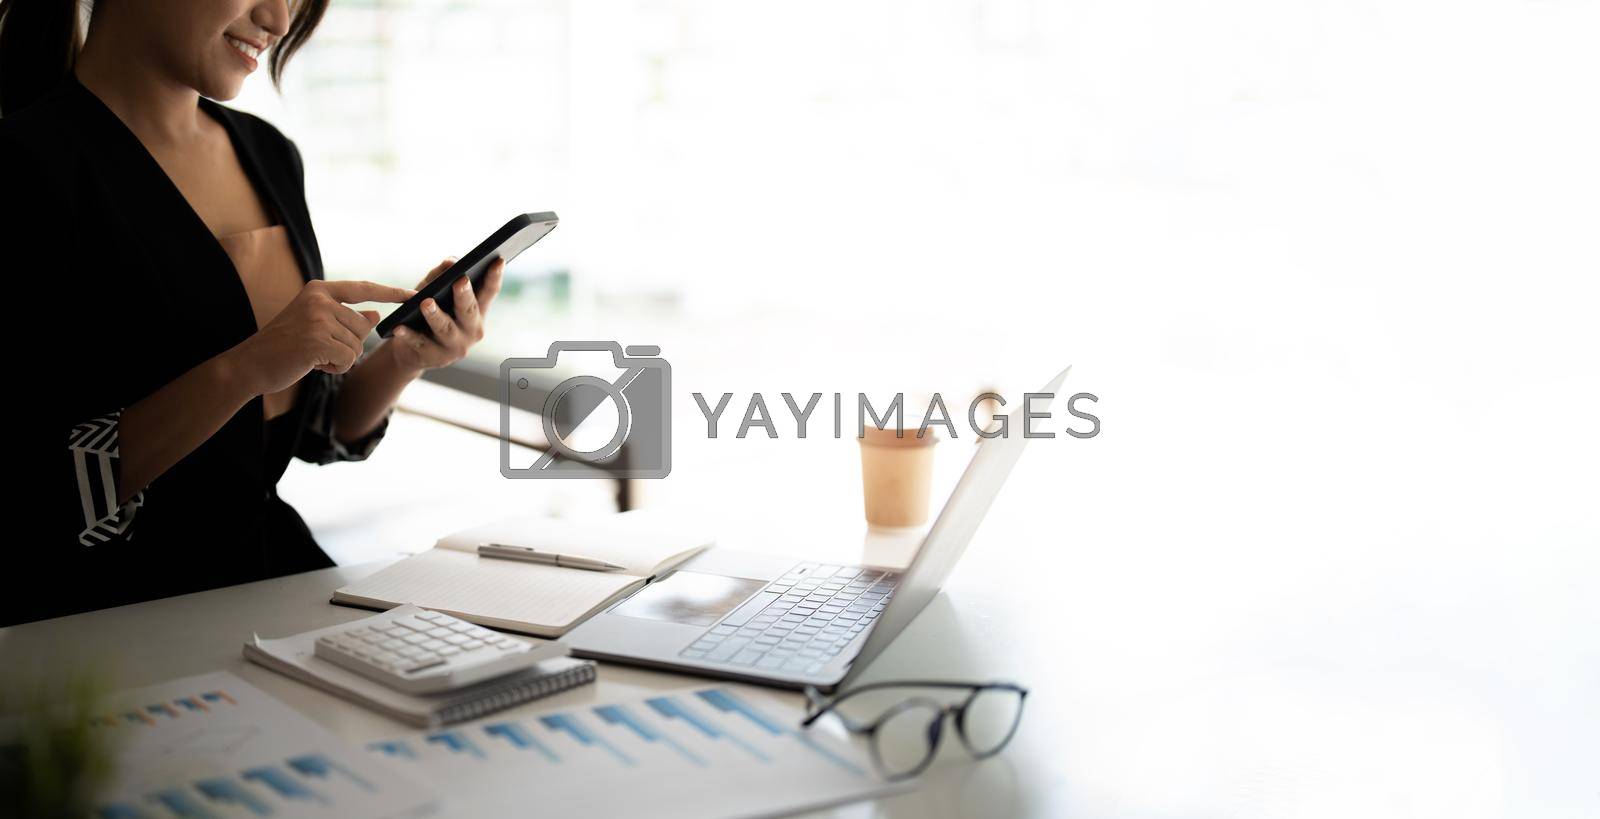 Royalty free image of Asian woman holding smart phone while using calculator for business financial accounting calculate money bank loan rent payments manage expenses finances taxes doing paperwork concept, close up. by nateemee